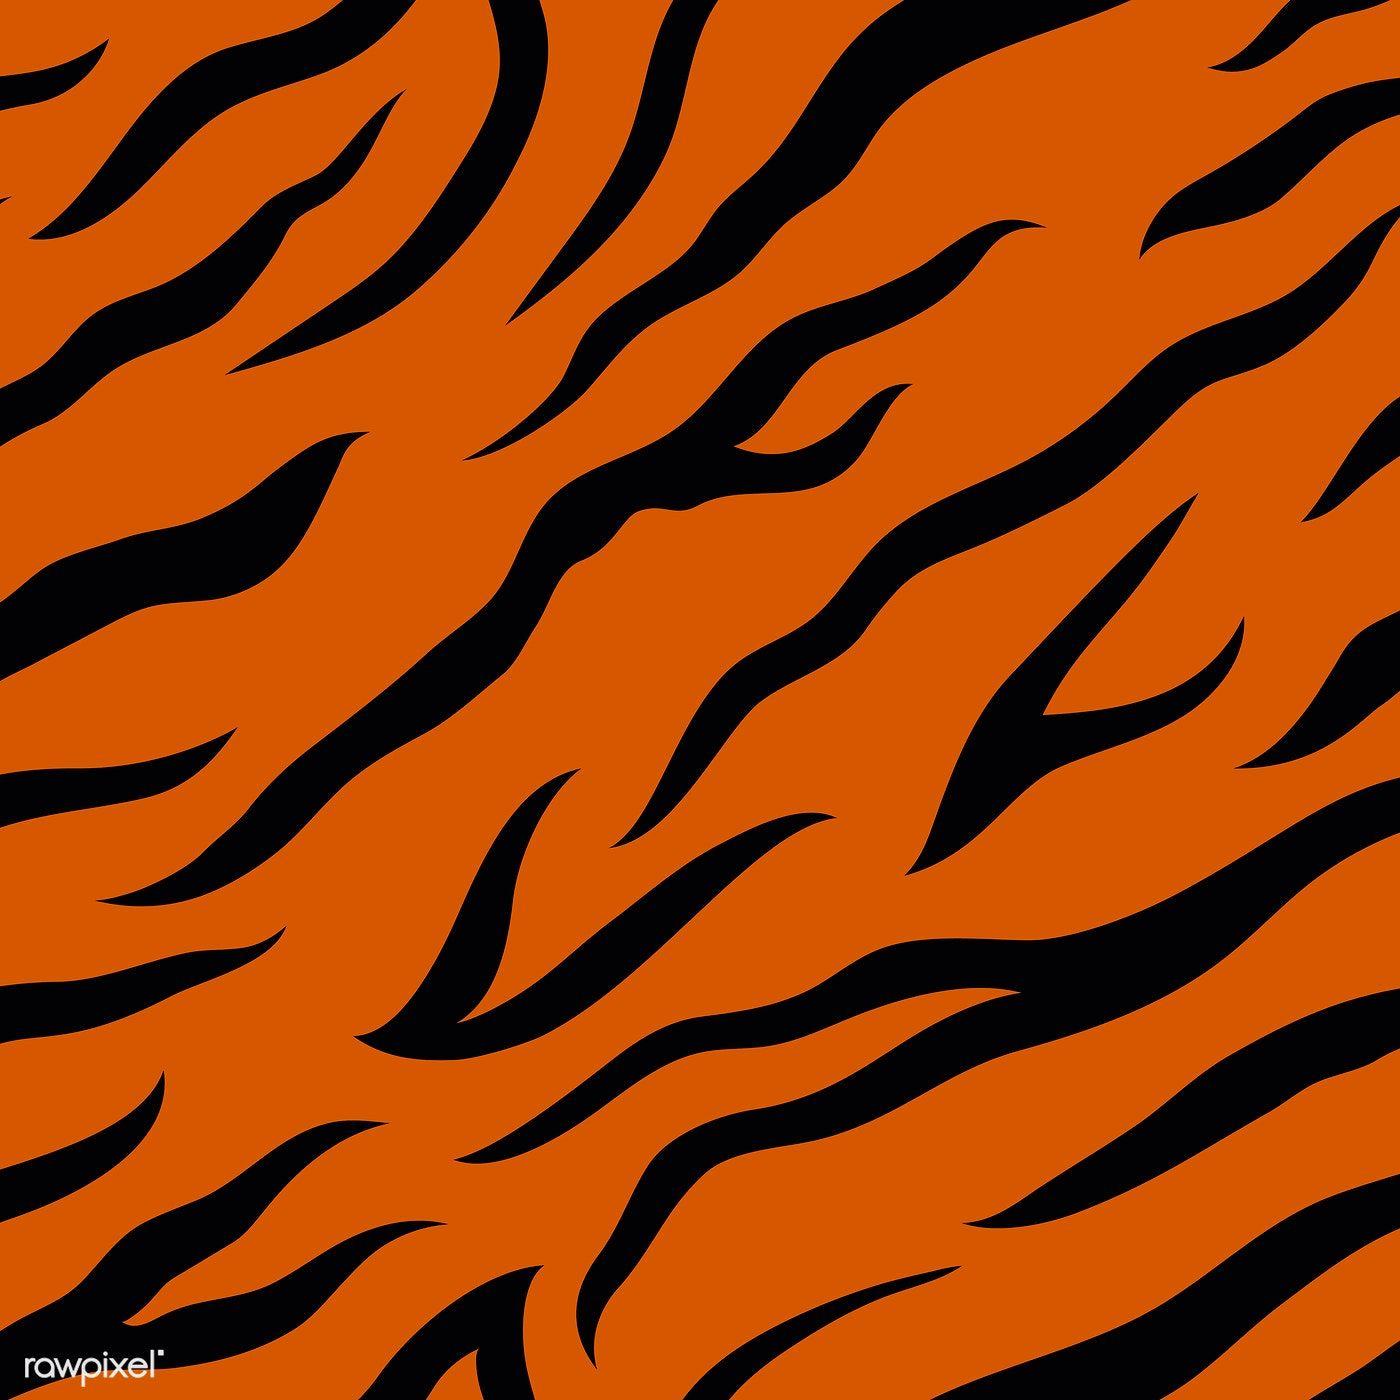 Tiger Pattern Wallpapers - Top Free Tiger Pattern Backgrounds ...